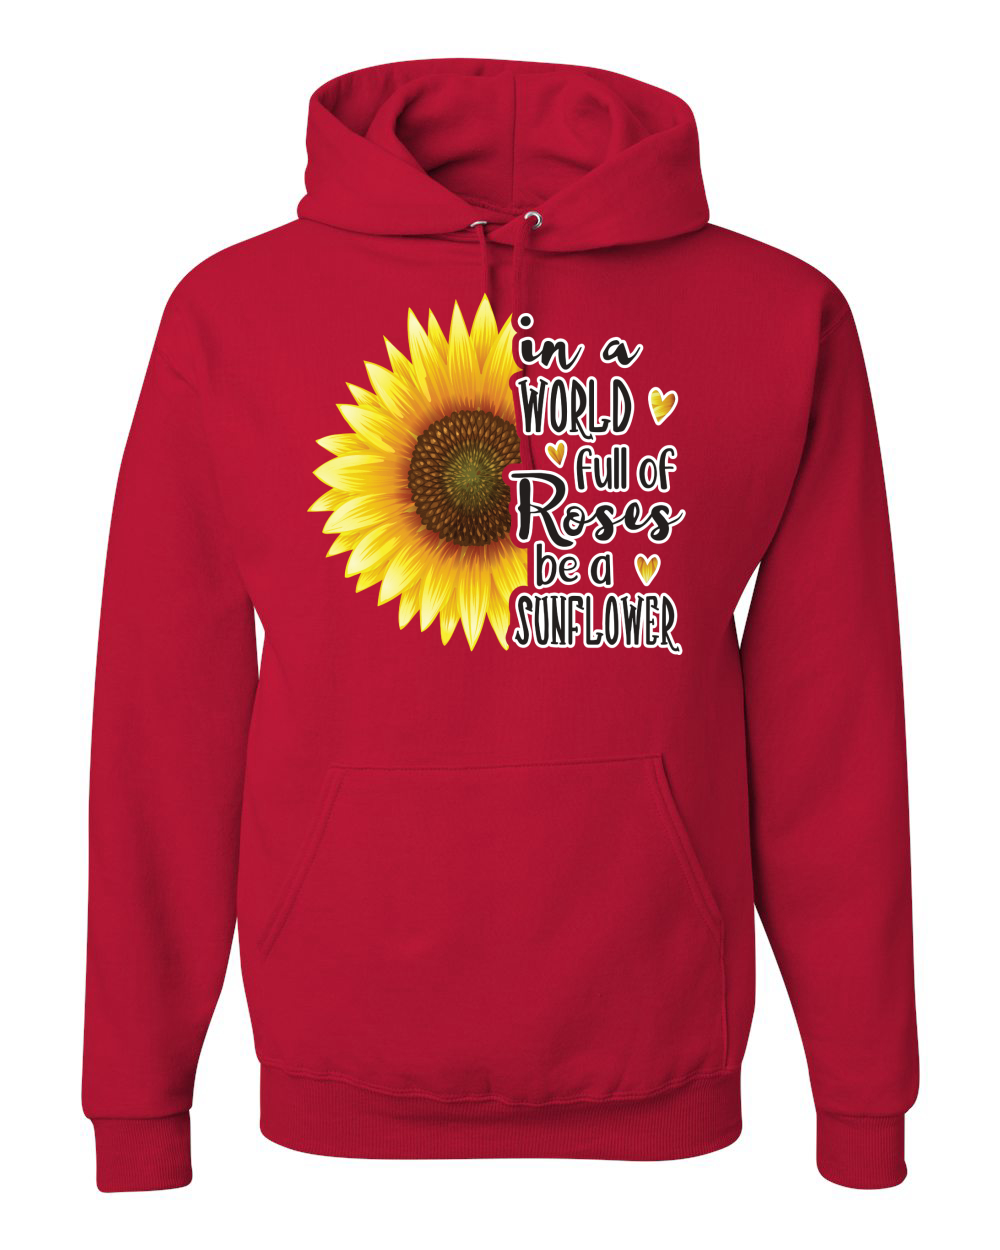 I became a mask maker because your life is worth my time Sunflower american fag T-Shirt gift for men women Unisex T-Shirt Sweatshirt Hoodie Gifts for Ladies Women Men Plus Size 